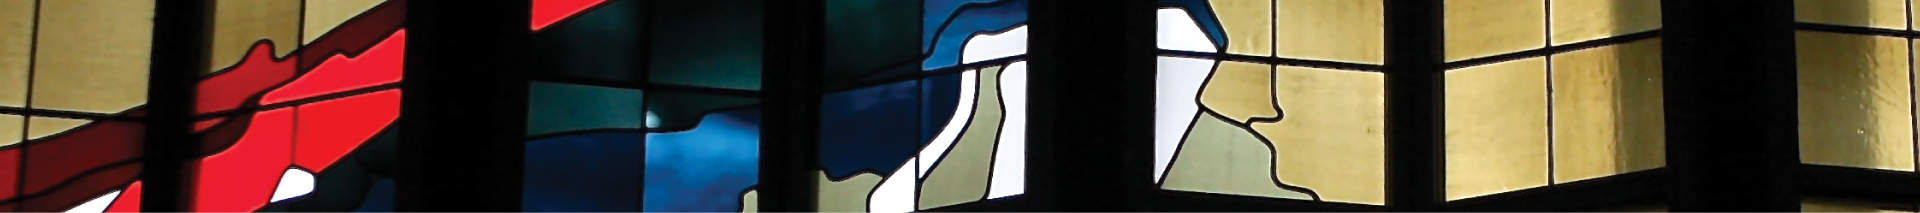 Lovers Lane UMC stained glass